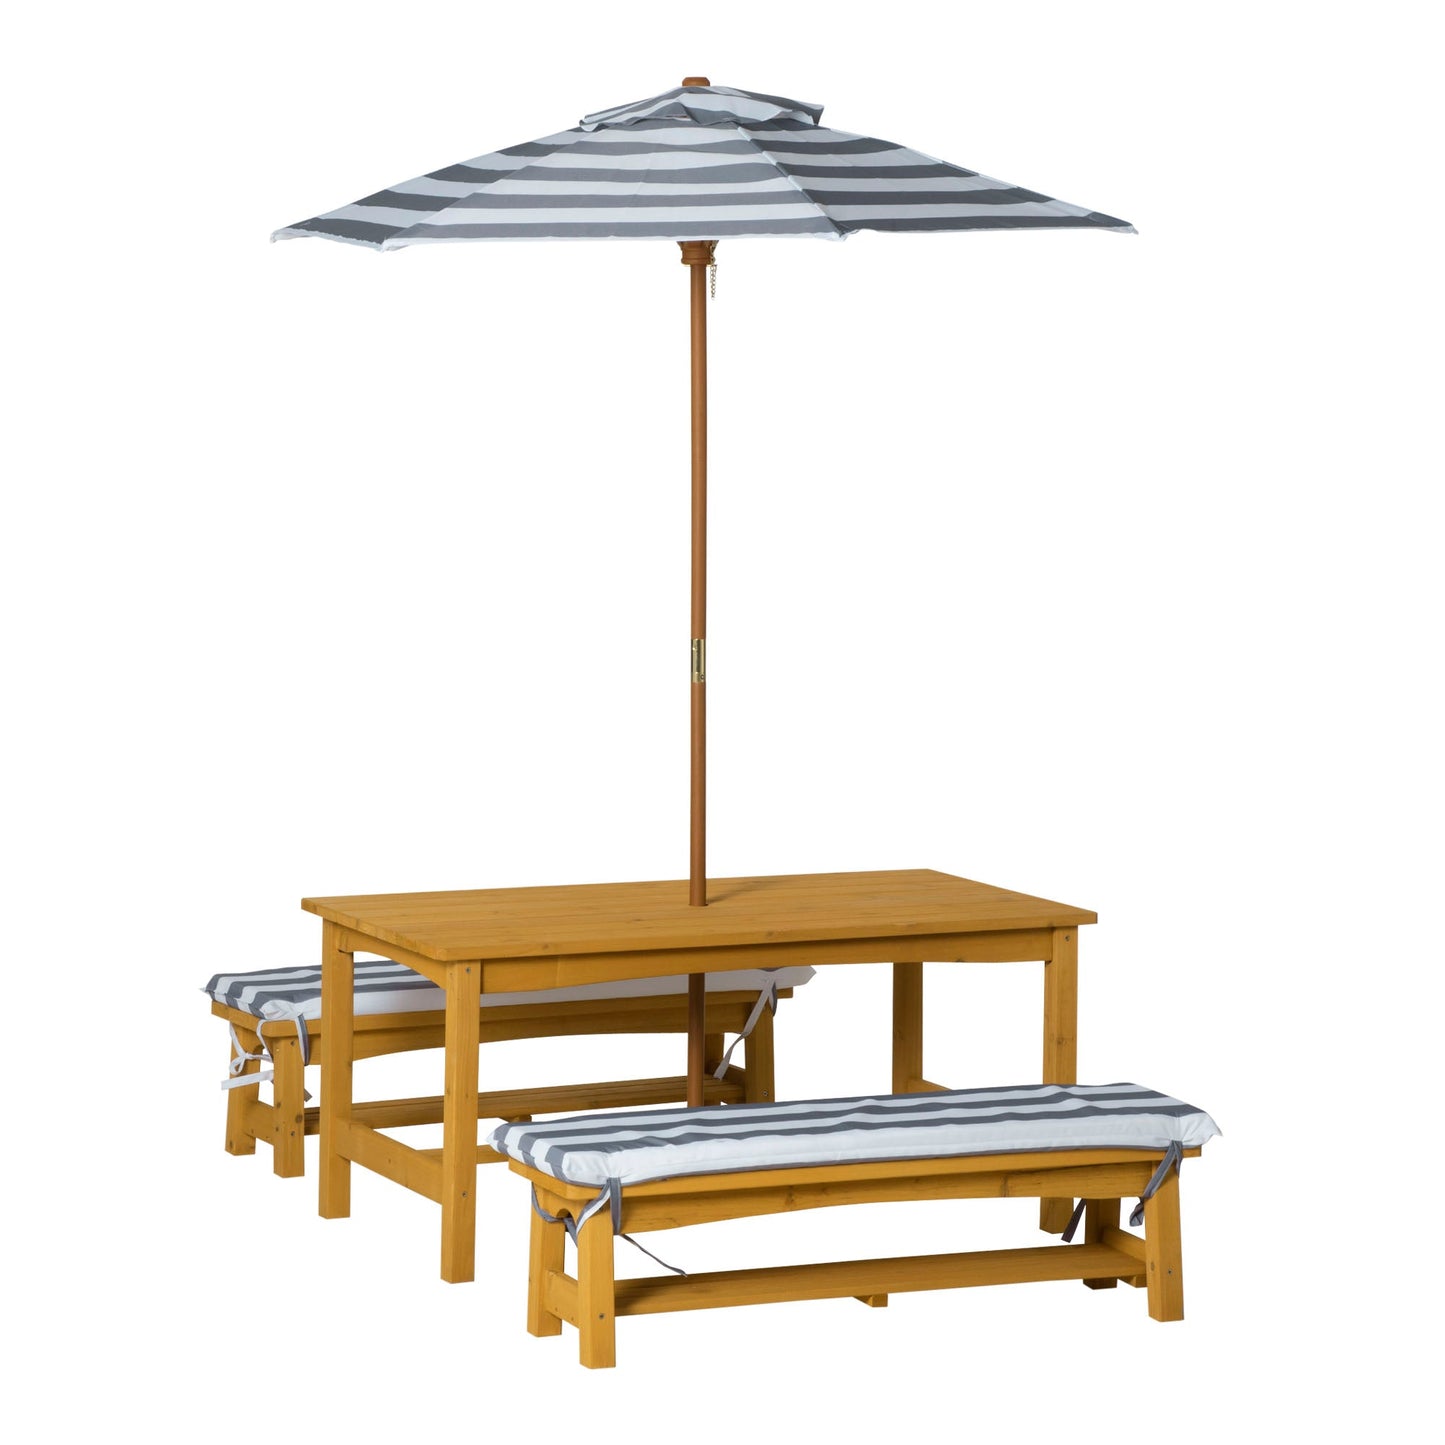 Outdoor and Garden-Kids Wooden Table Bench Set with Cushions, Outdoor Picnic Furniture with Removable Umbrella, for Backyard, Garden, Aged 3-8 Years Old, Yellow - Outdoor Style Company